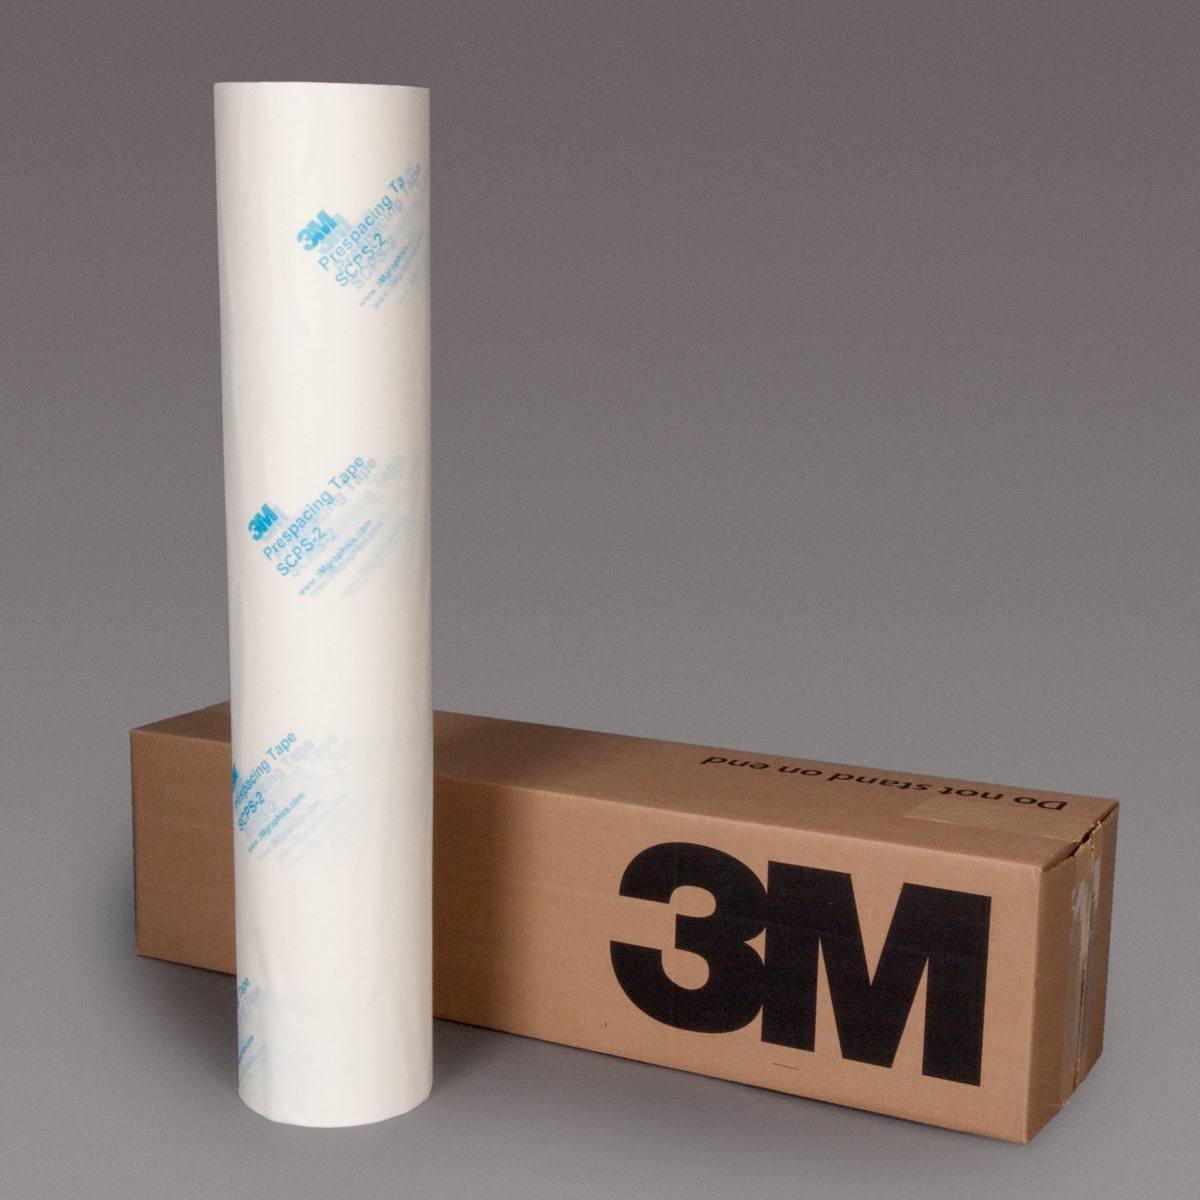 3M Application-Tape SCPS-2 0,61m x 91,4m